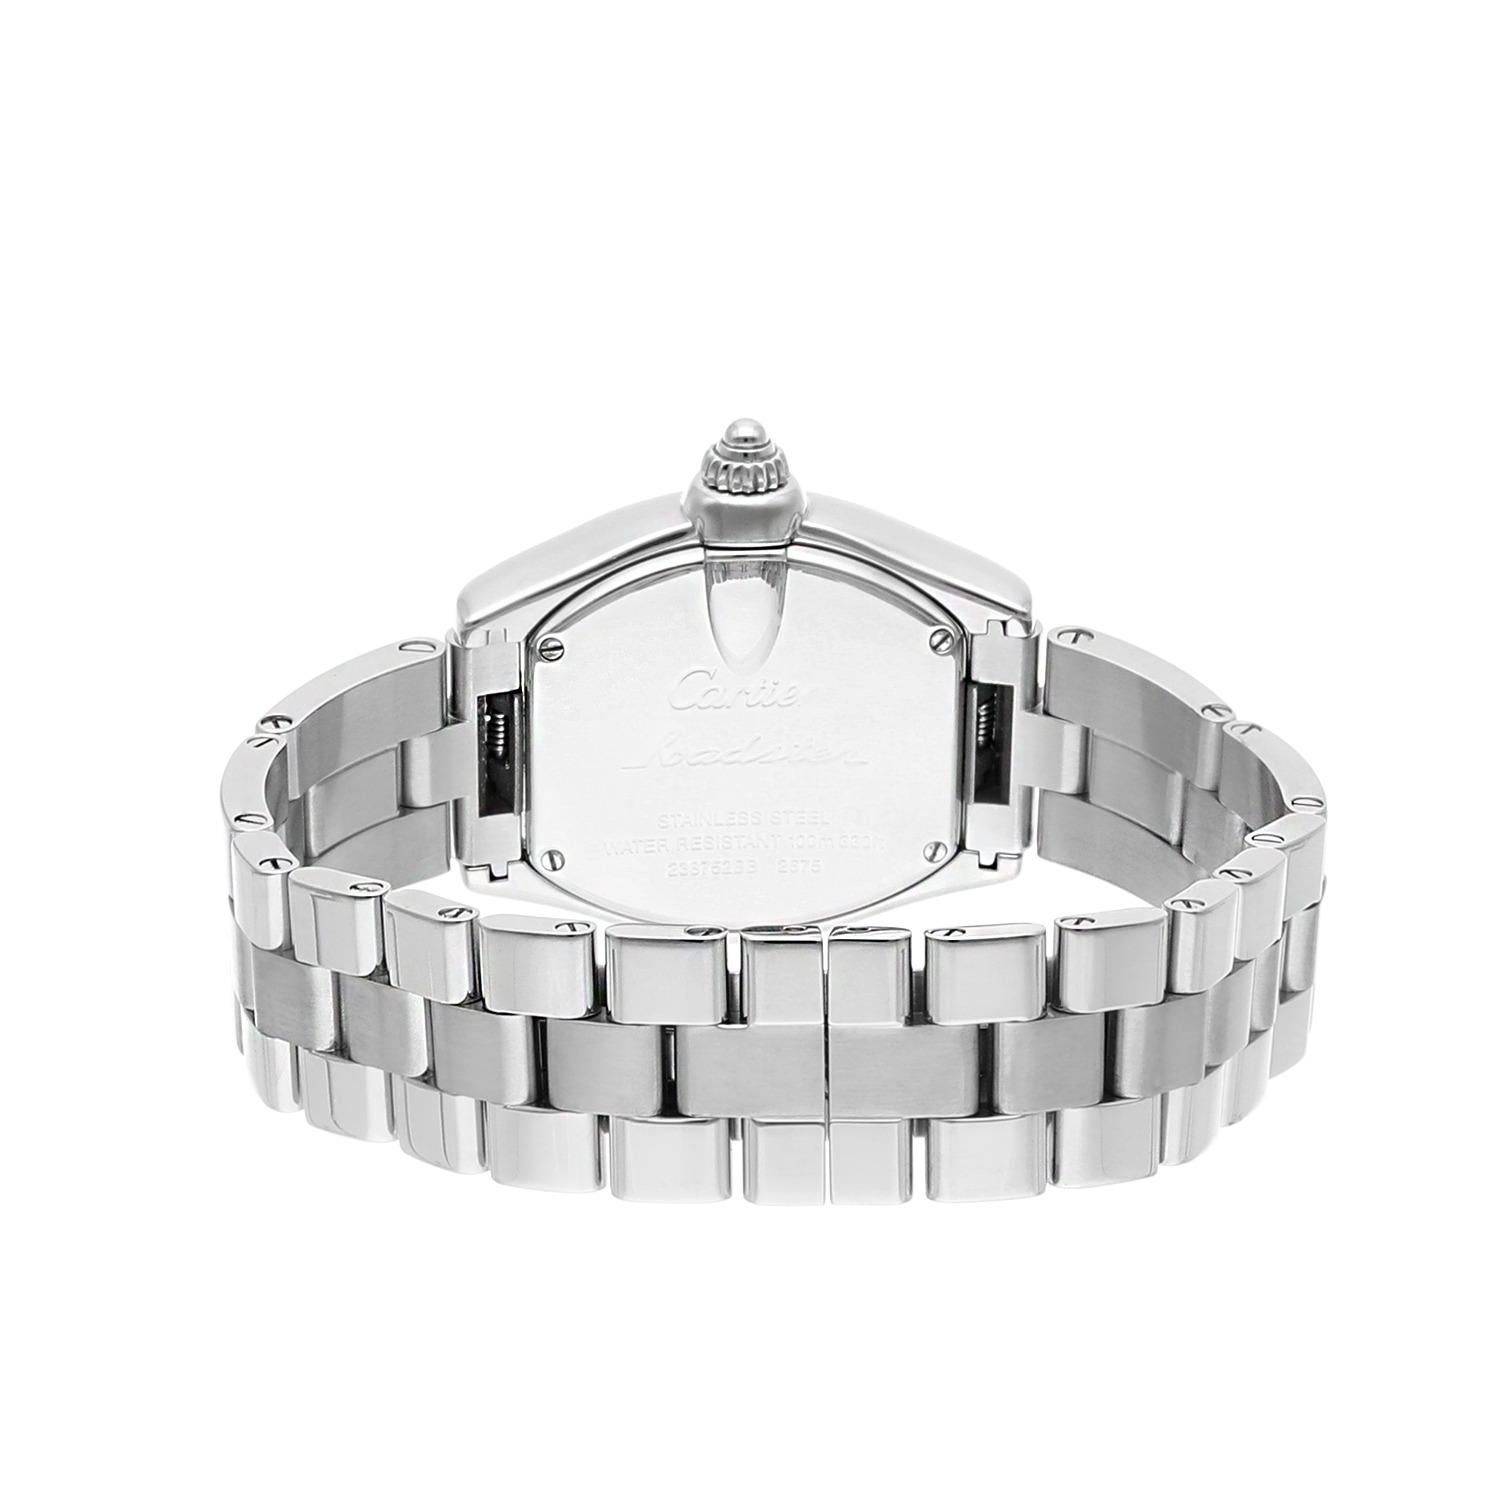 Cartier Roadster Sm NWMD46 Ladies Peach Dial Stainless Steel with Diamond Bezel For Sale 1